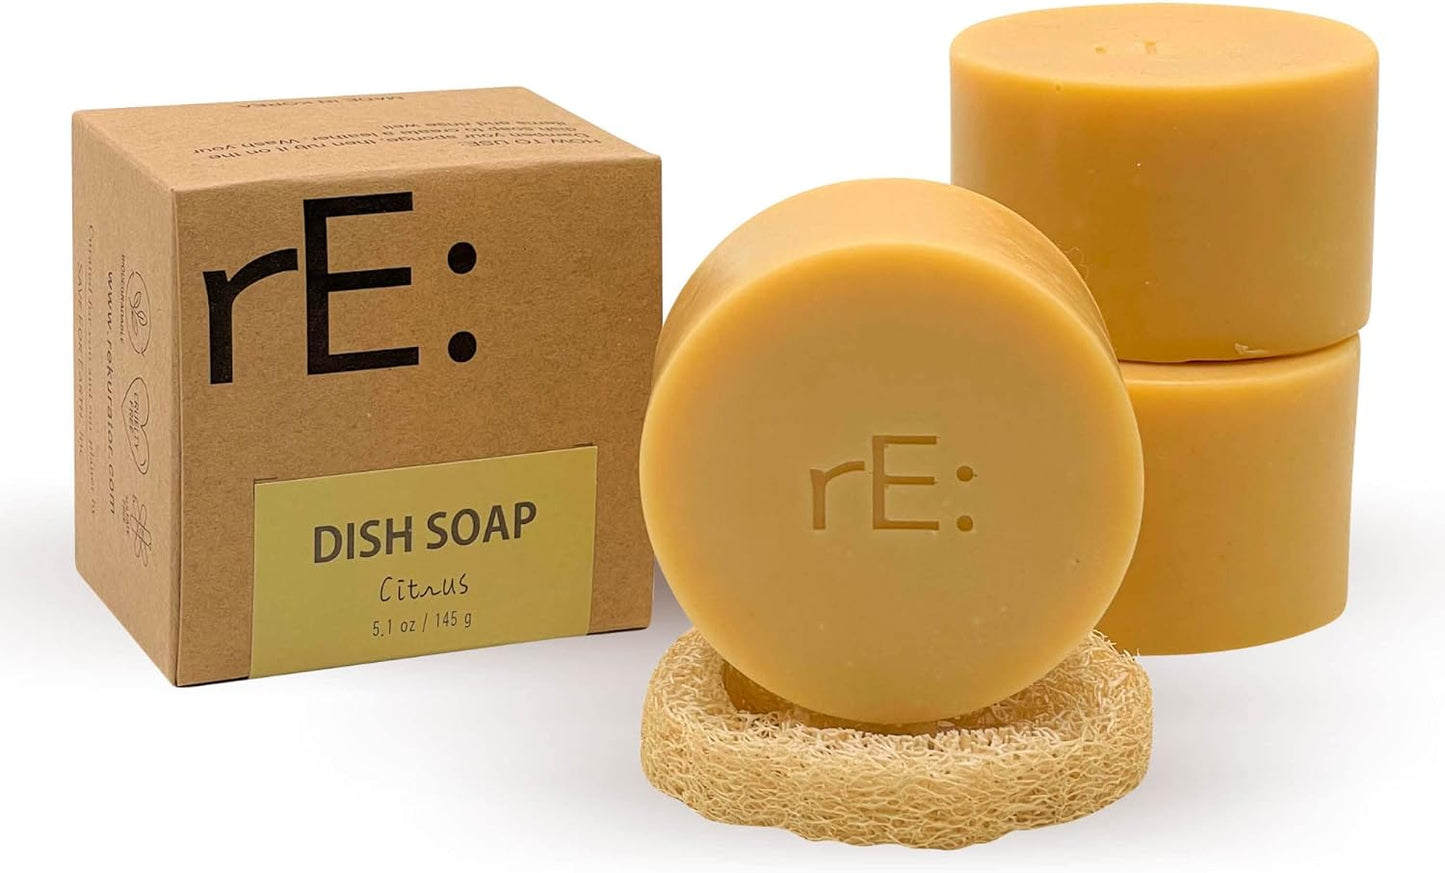 Dish Washing Soap Bars (Loofah Holder Sponge Included) - Palm Oil Free, Eco Friendly, Zero Waste, Plastic Free, Free of Artificial Dyes and Fragrance (Citrus)